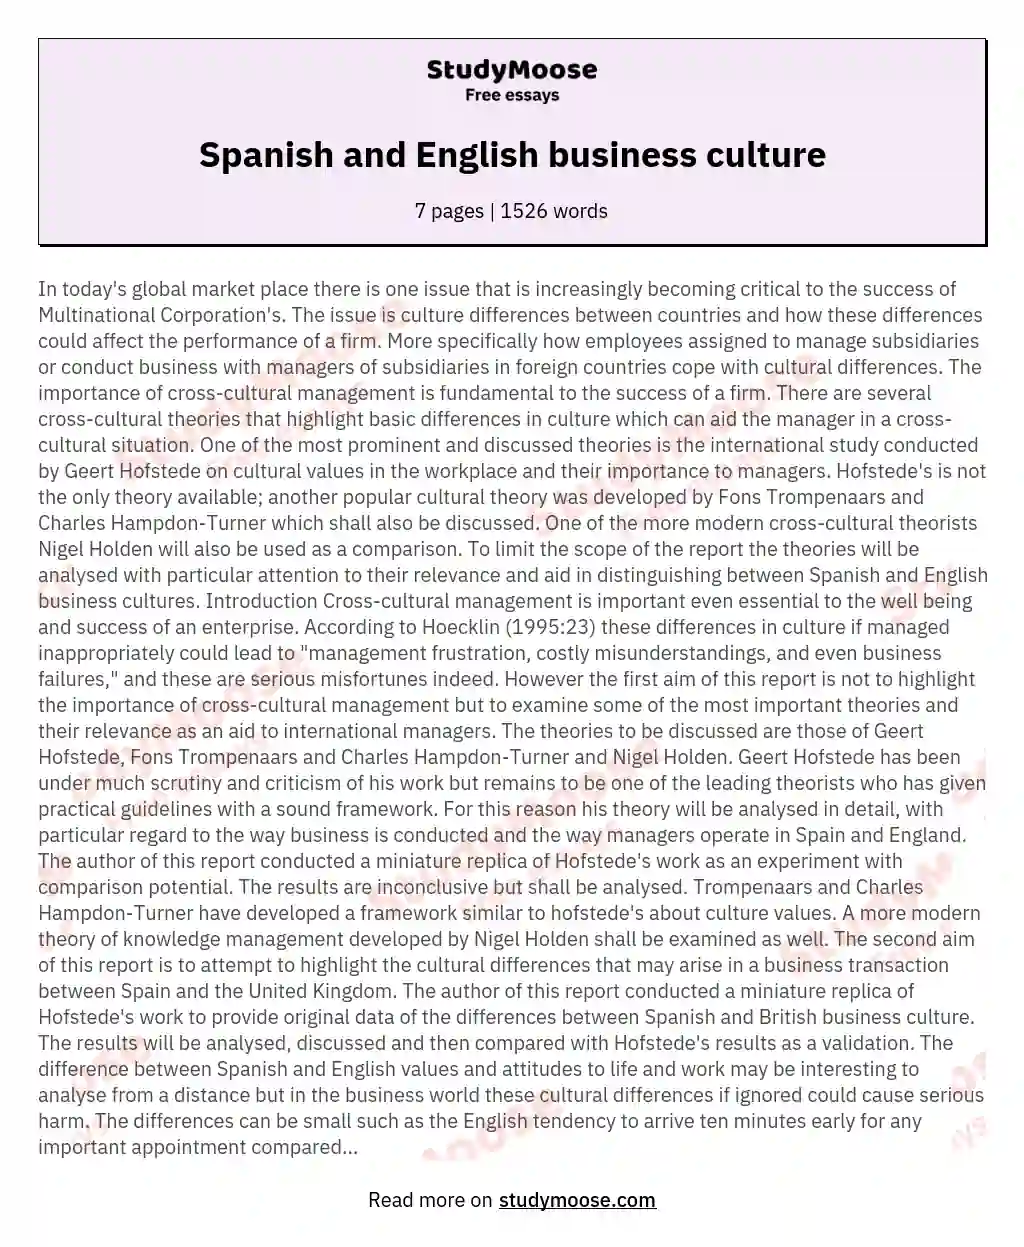 Spanish and English business culture essay